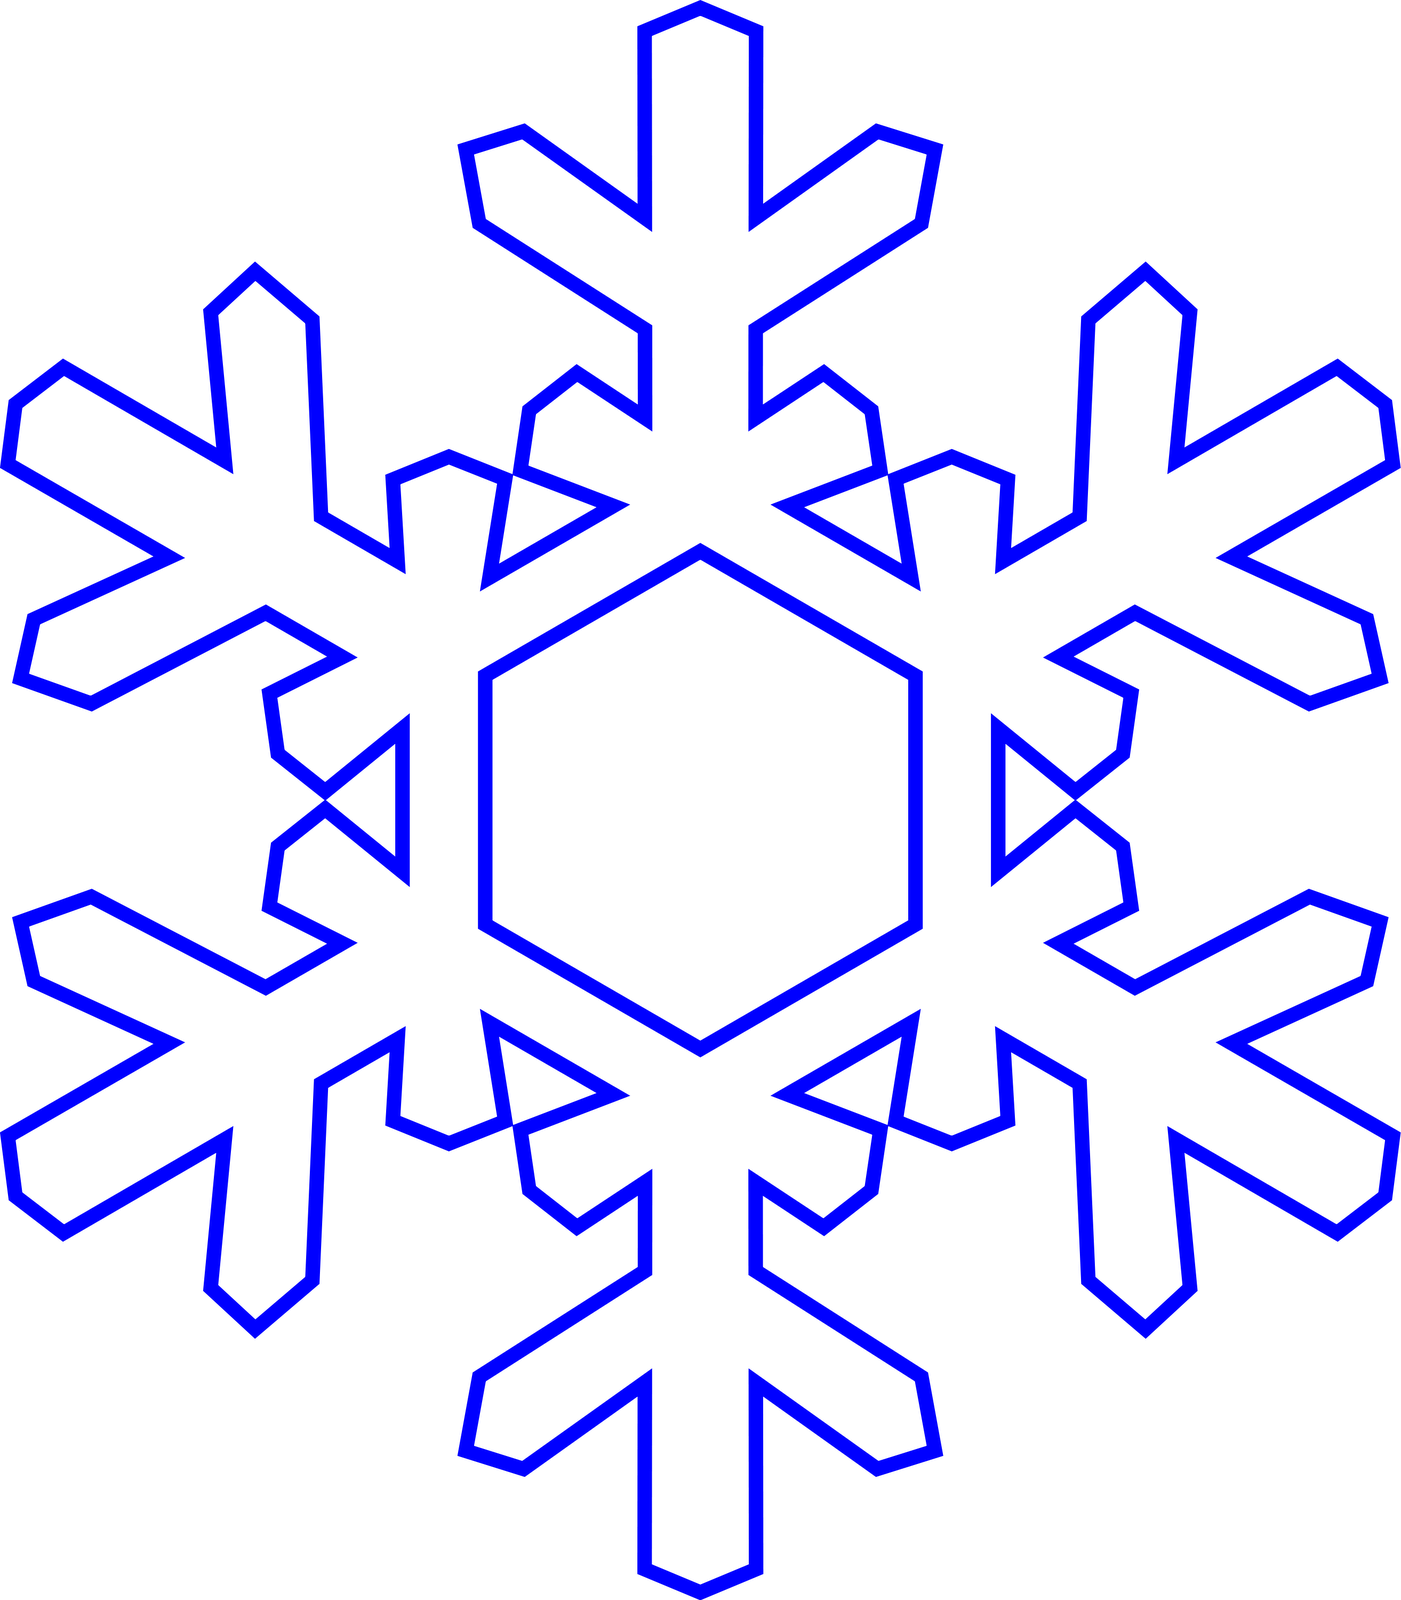 Snowflake Outline Cliparts.co